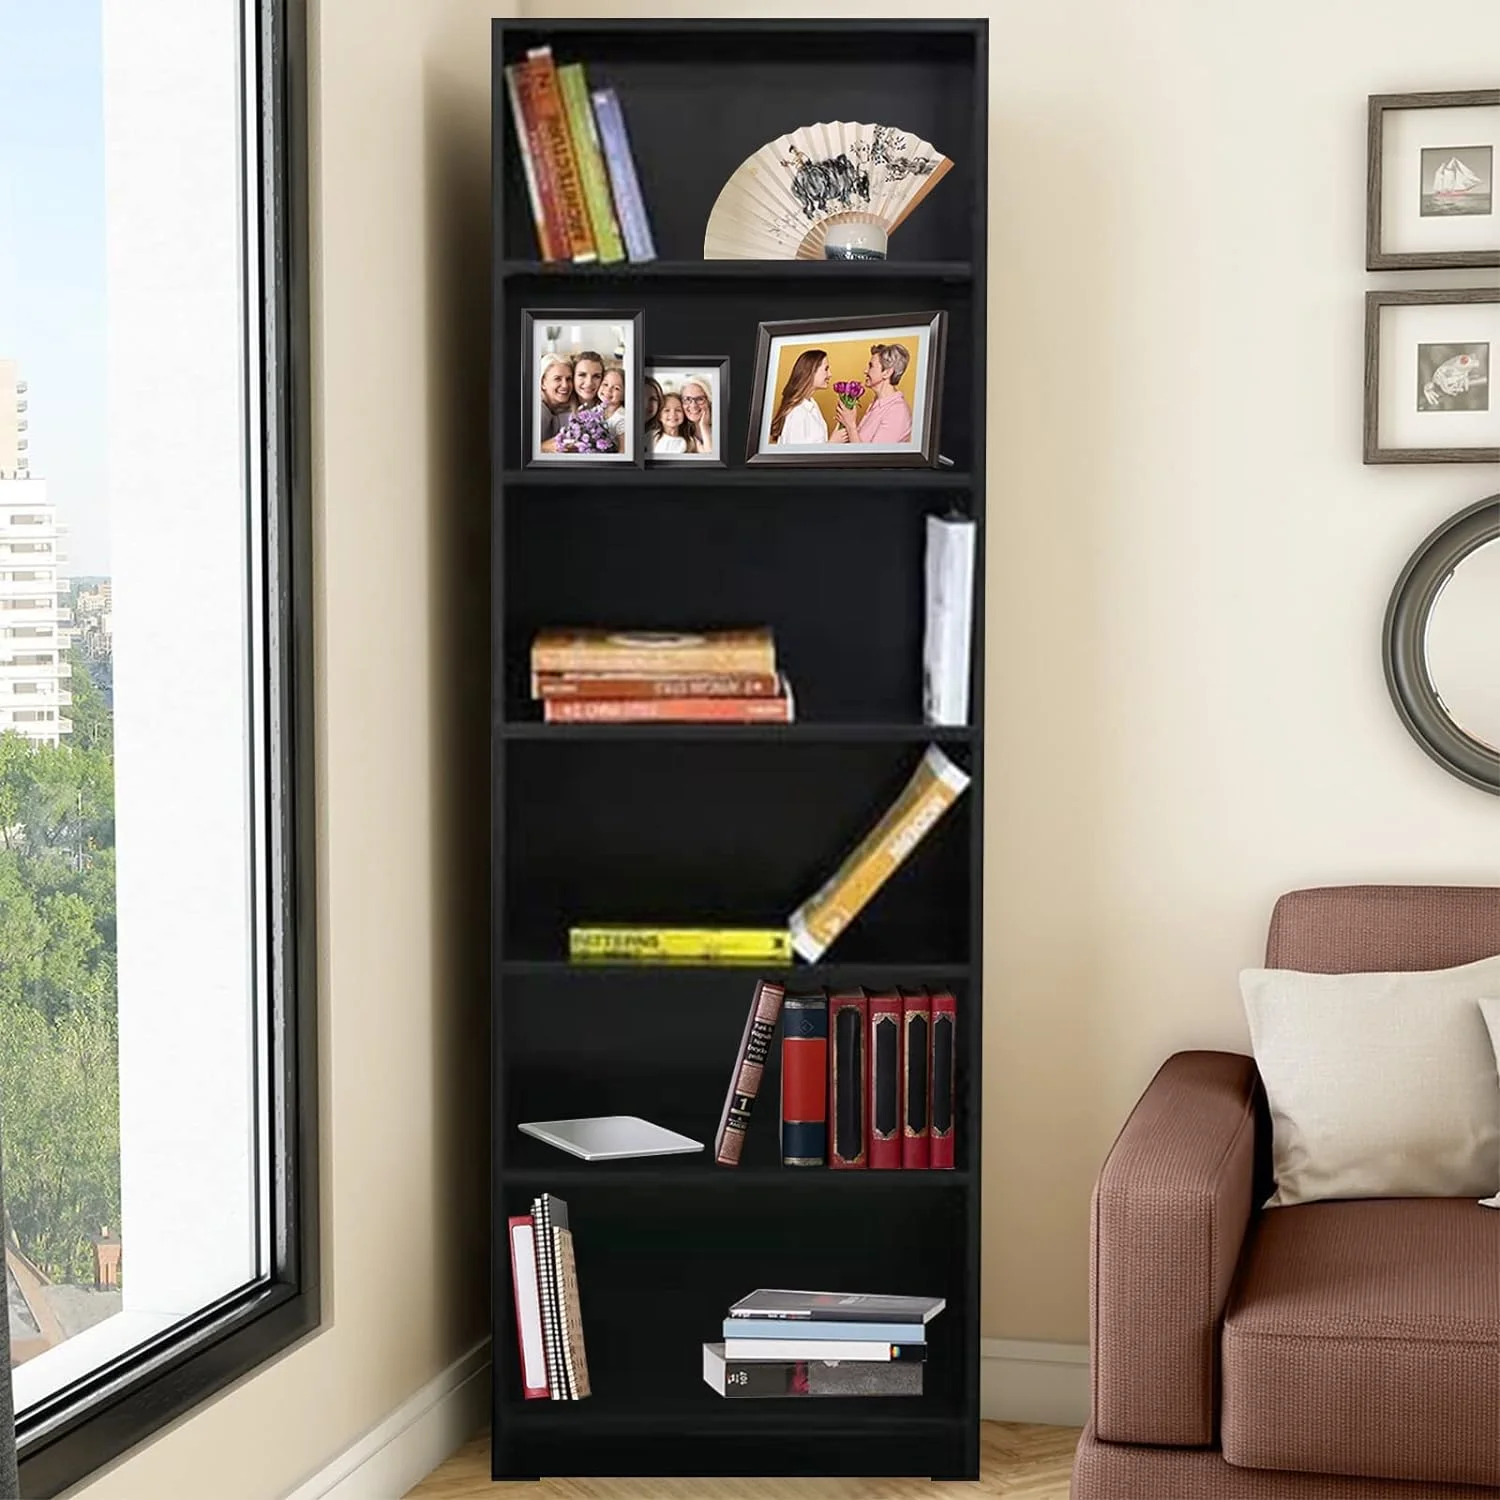 Modern Style Bookcase modern wooden standard display bookshelf Unit With Adjustable Shelving Furniture For Living Roo